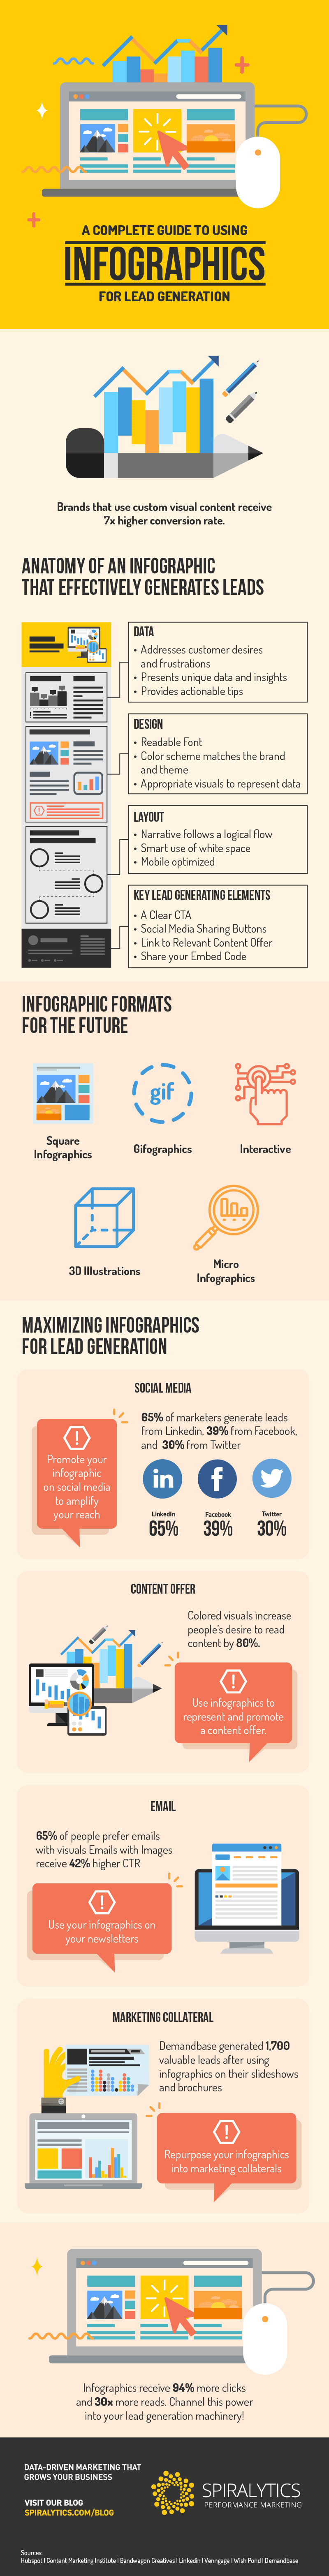 A Complete Guide to Using Infographics for Lead Generation